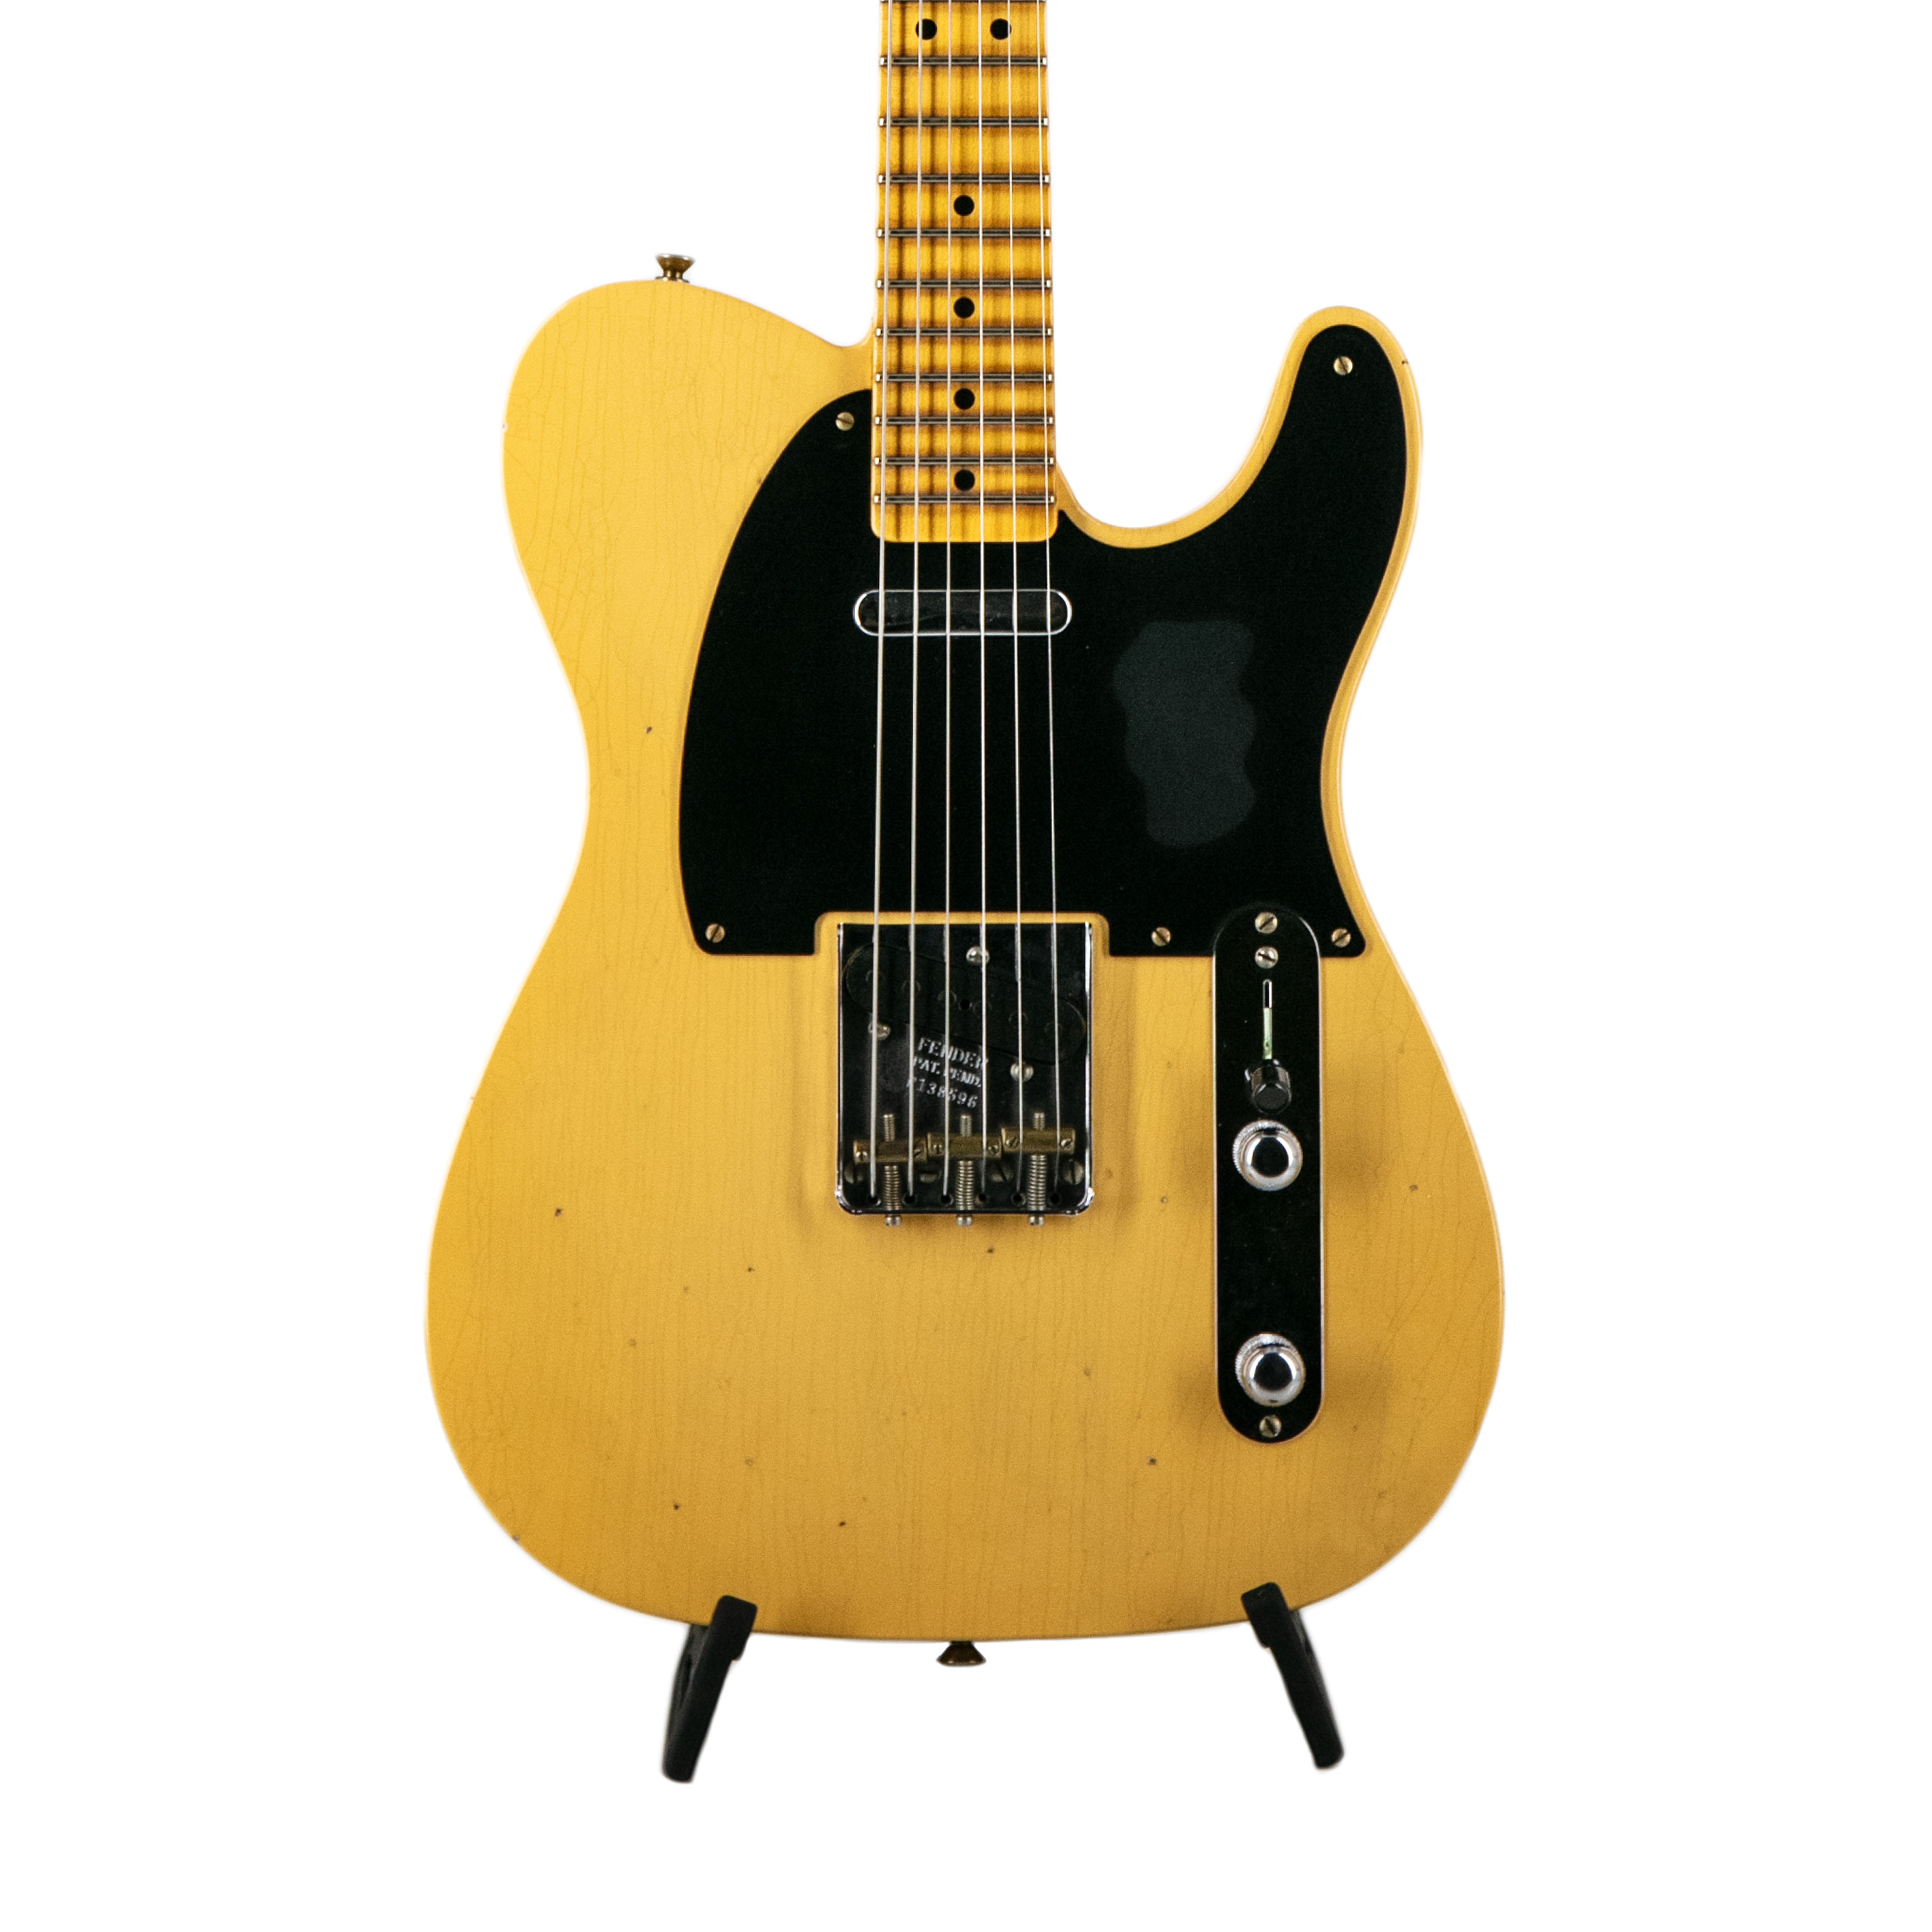 Fender Custom Shop 52 Telecaster Journeyman Relic Electric Guitar, Aged Nocaster Blonde | Zoso Music Sdn Bhd